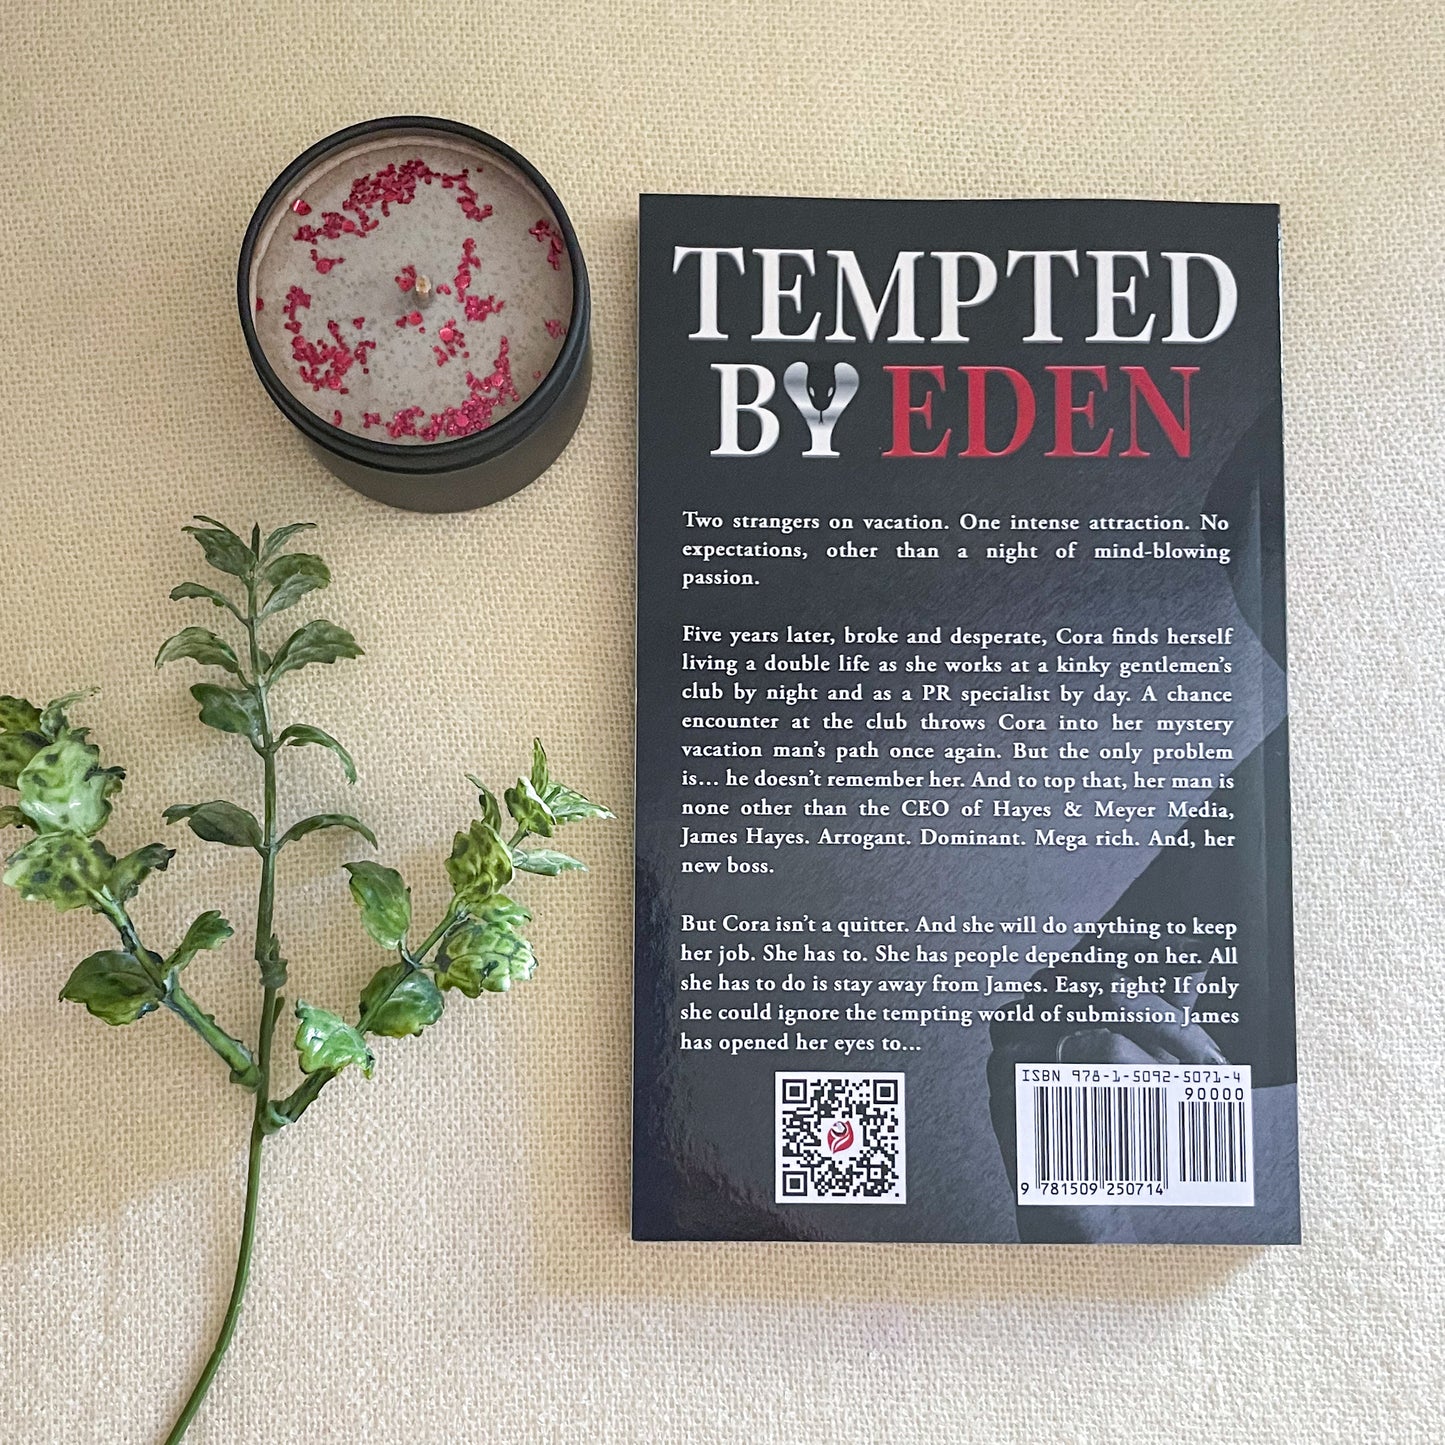 Tempted by Eden by Jade May